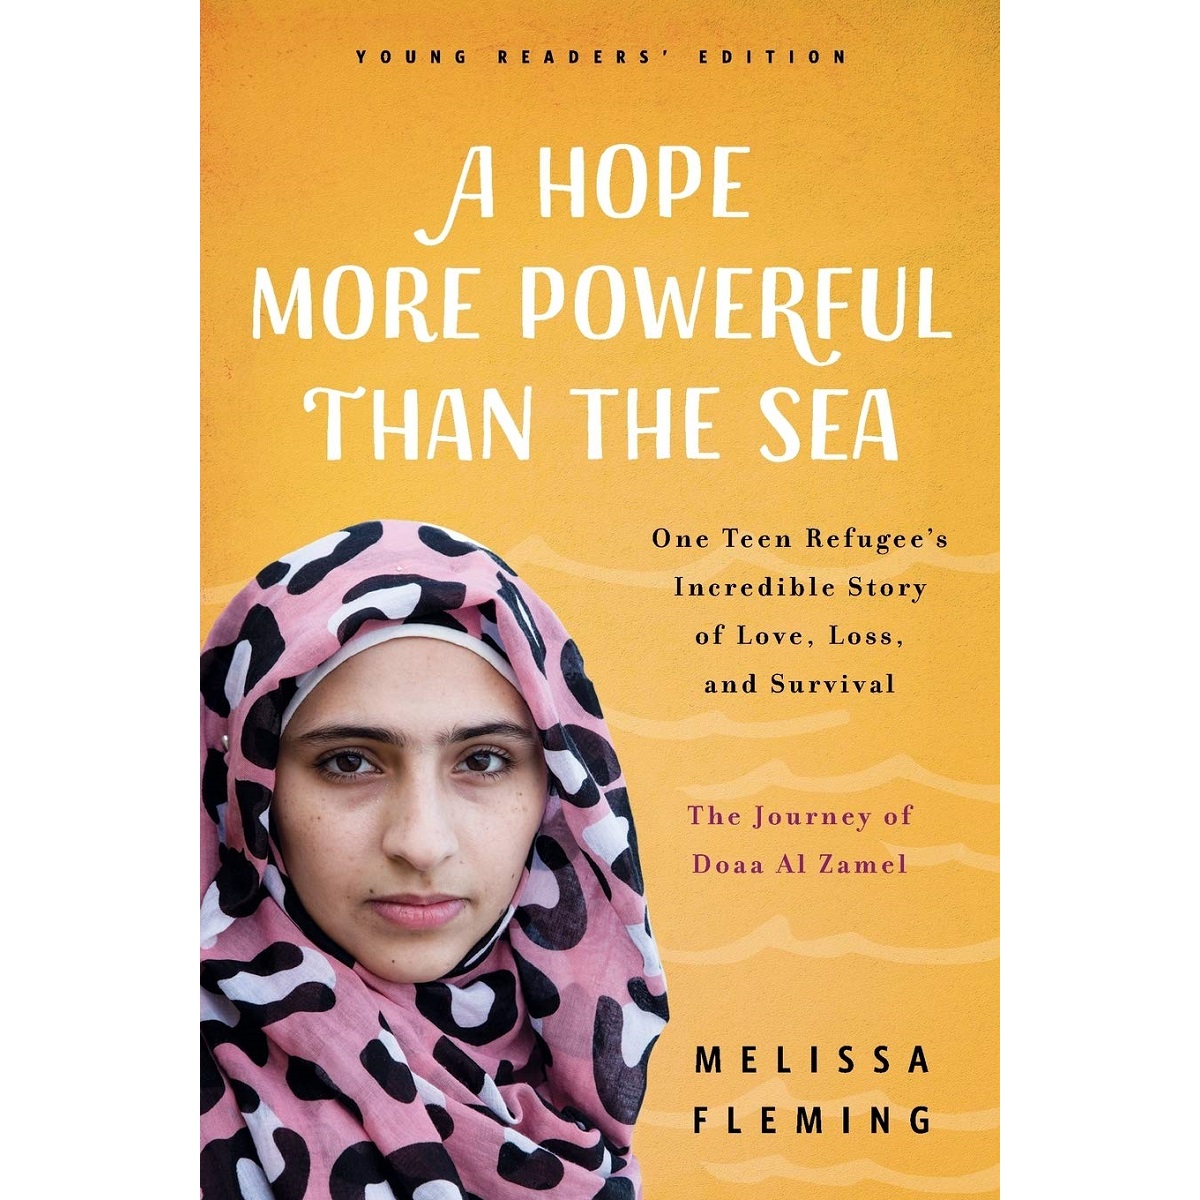 A Hope More Powerful Than the Sea By Melissa Fleming [Young Readers' Edition]